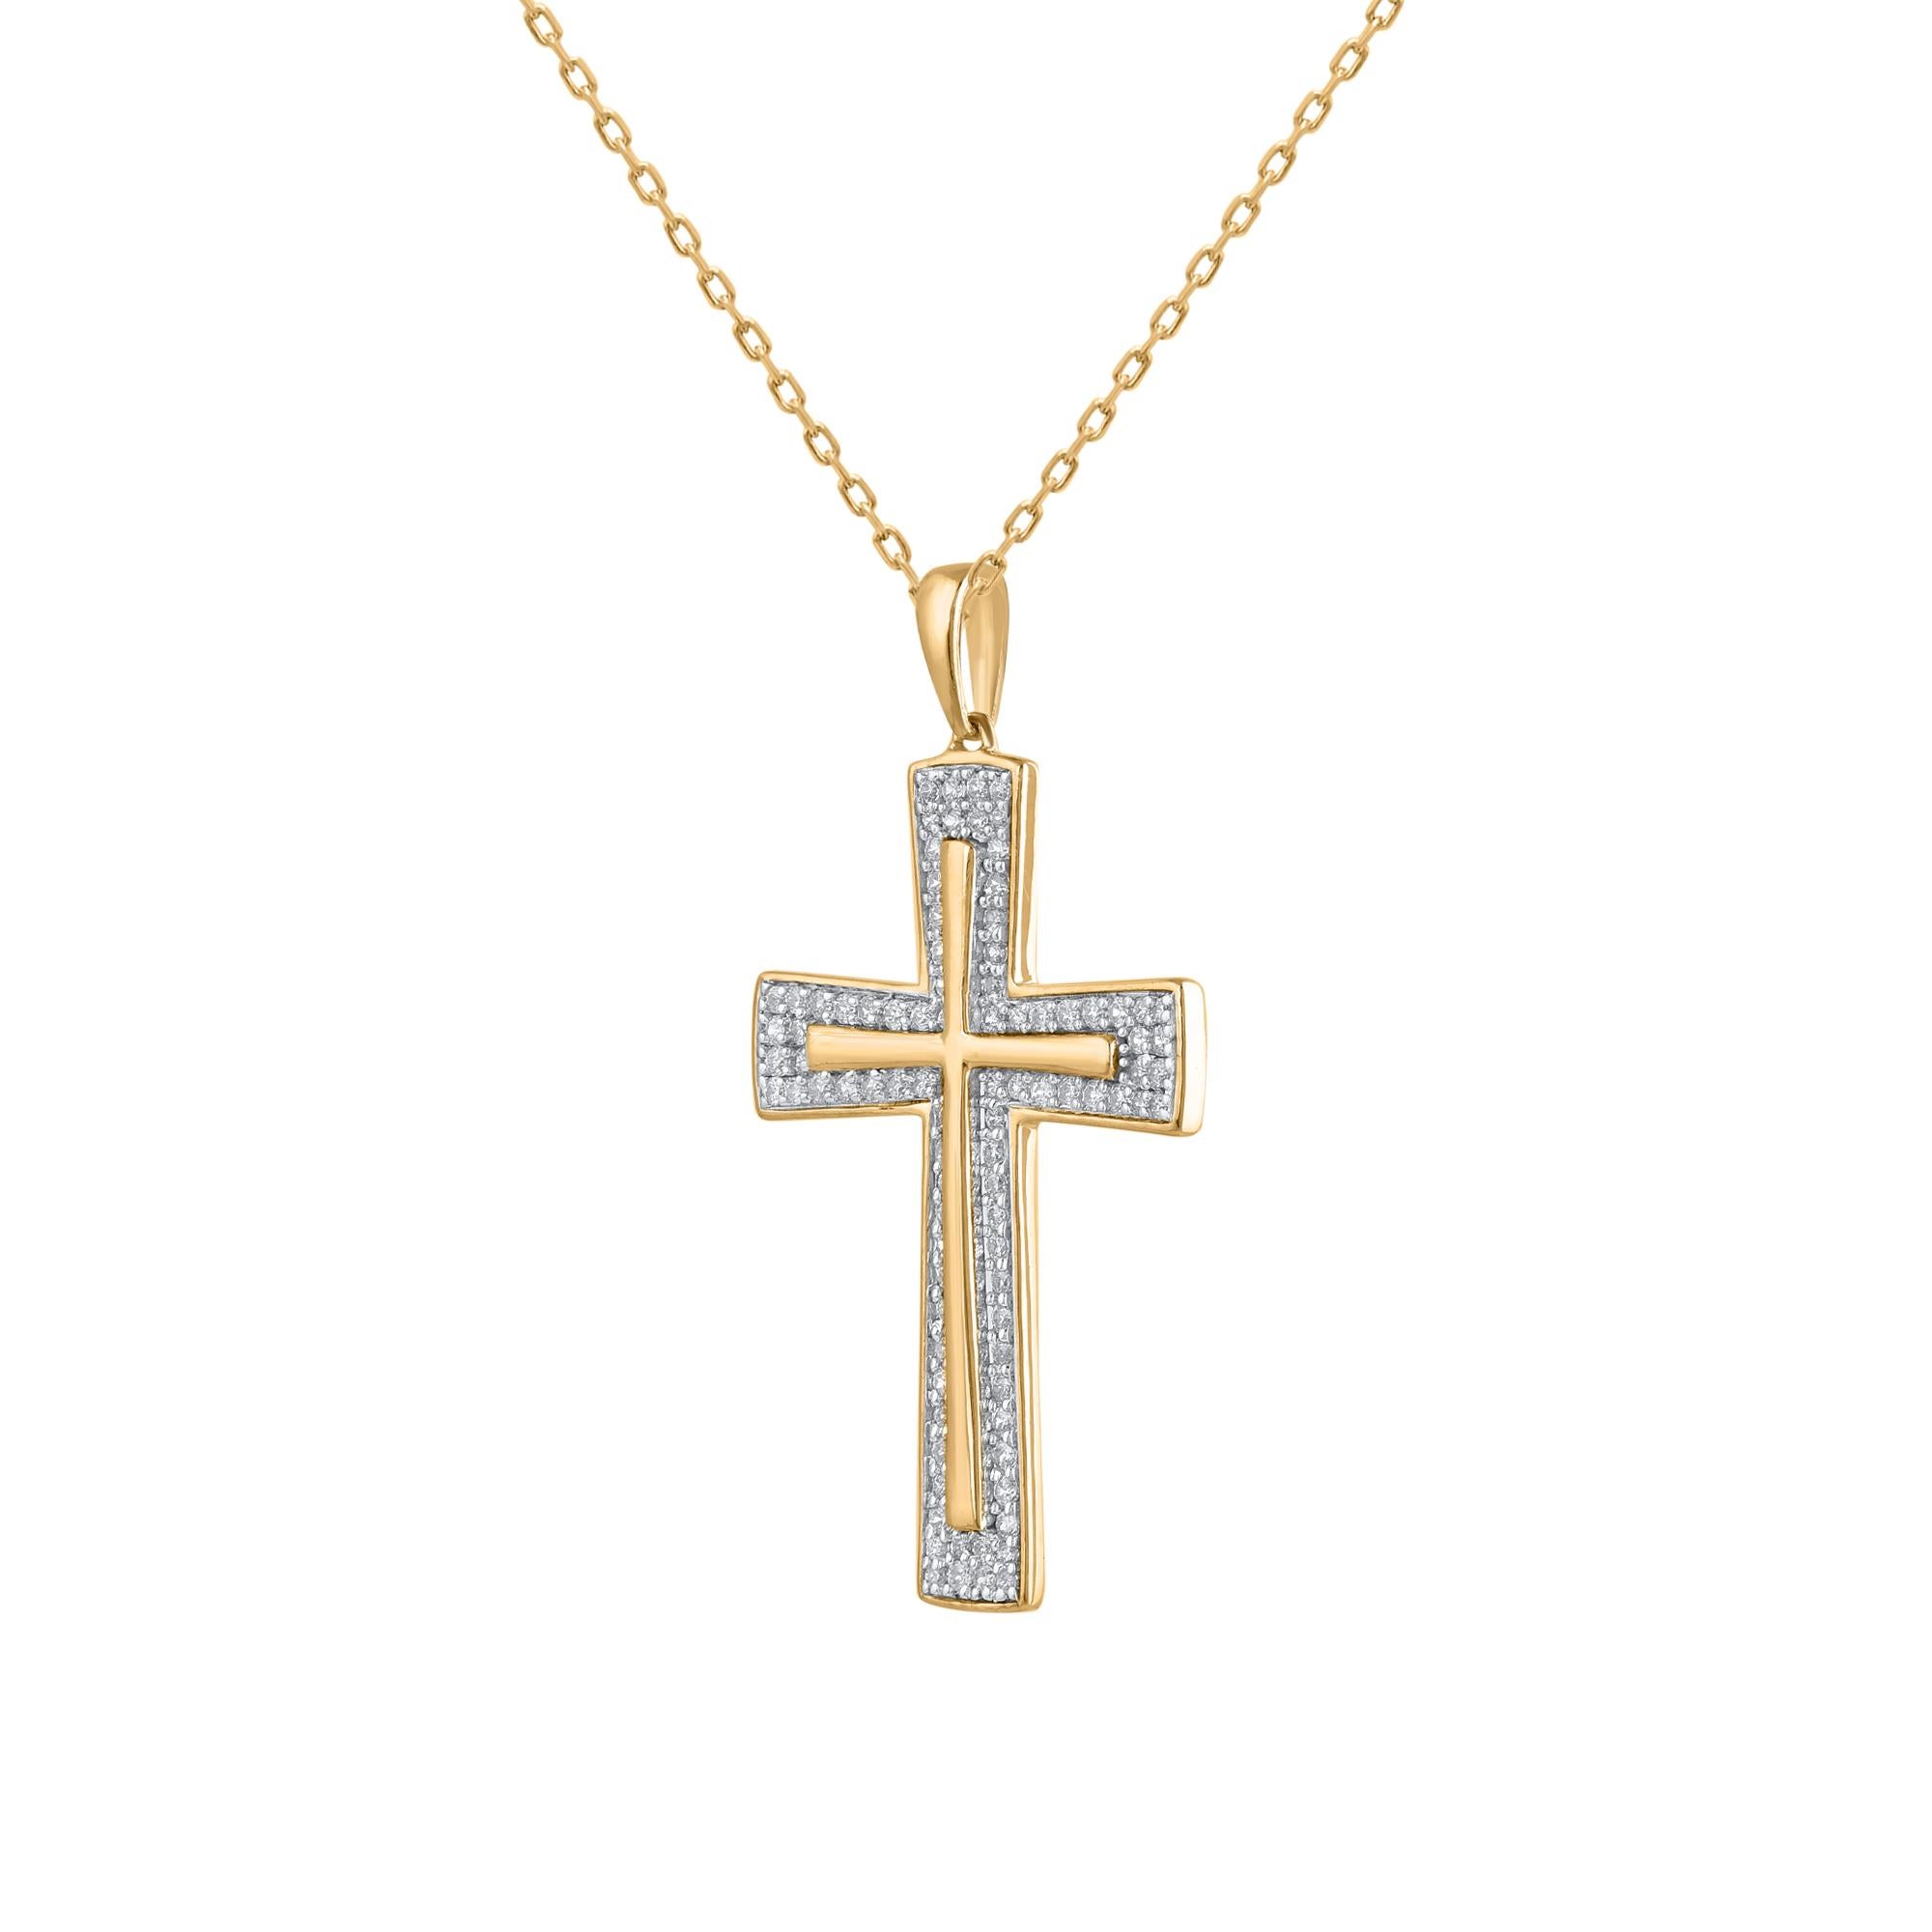 Let your faith shine with this simple and elegant cross pendant. Beautifully crafted by our inhouse experts in 14 karat yellow gold and embellished with 93 single cut & brilliant cut diamond set in Pave setting. The total diamond weight is 0.50